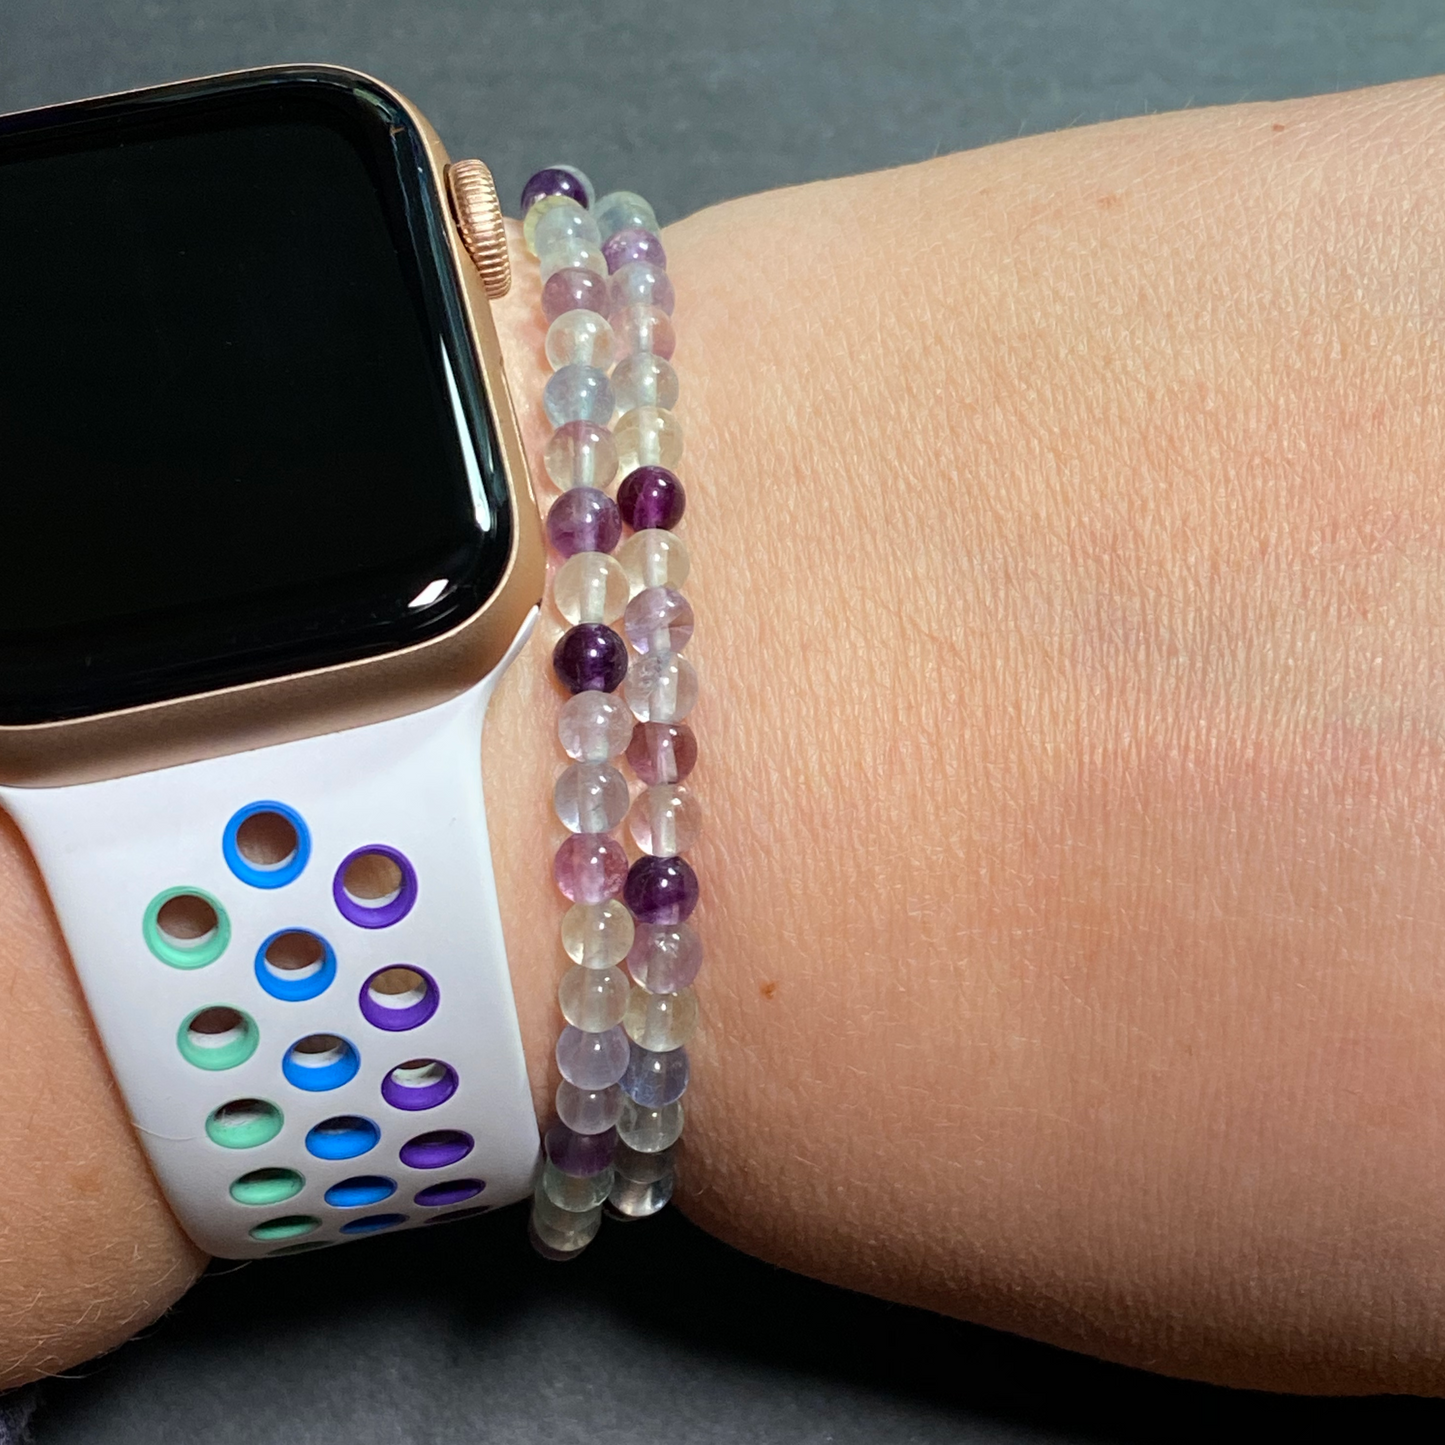 Two rainbow fluorite bracelets are displayed on a woman's wrist next to an Apple watch.